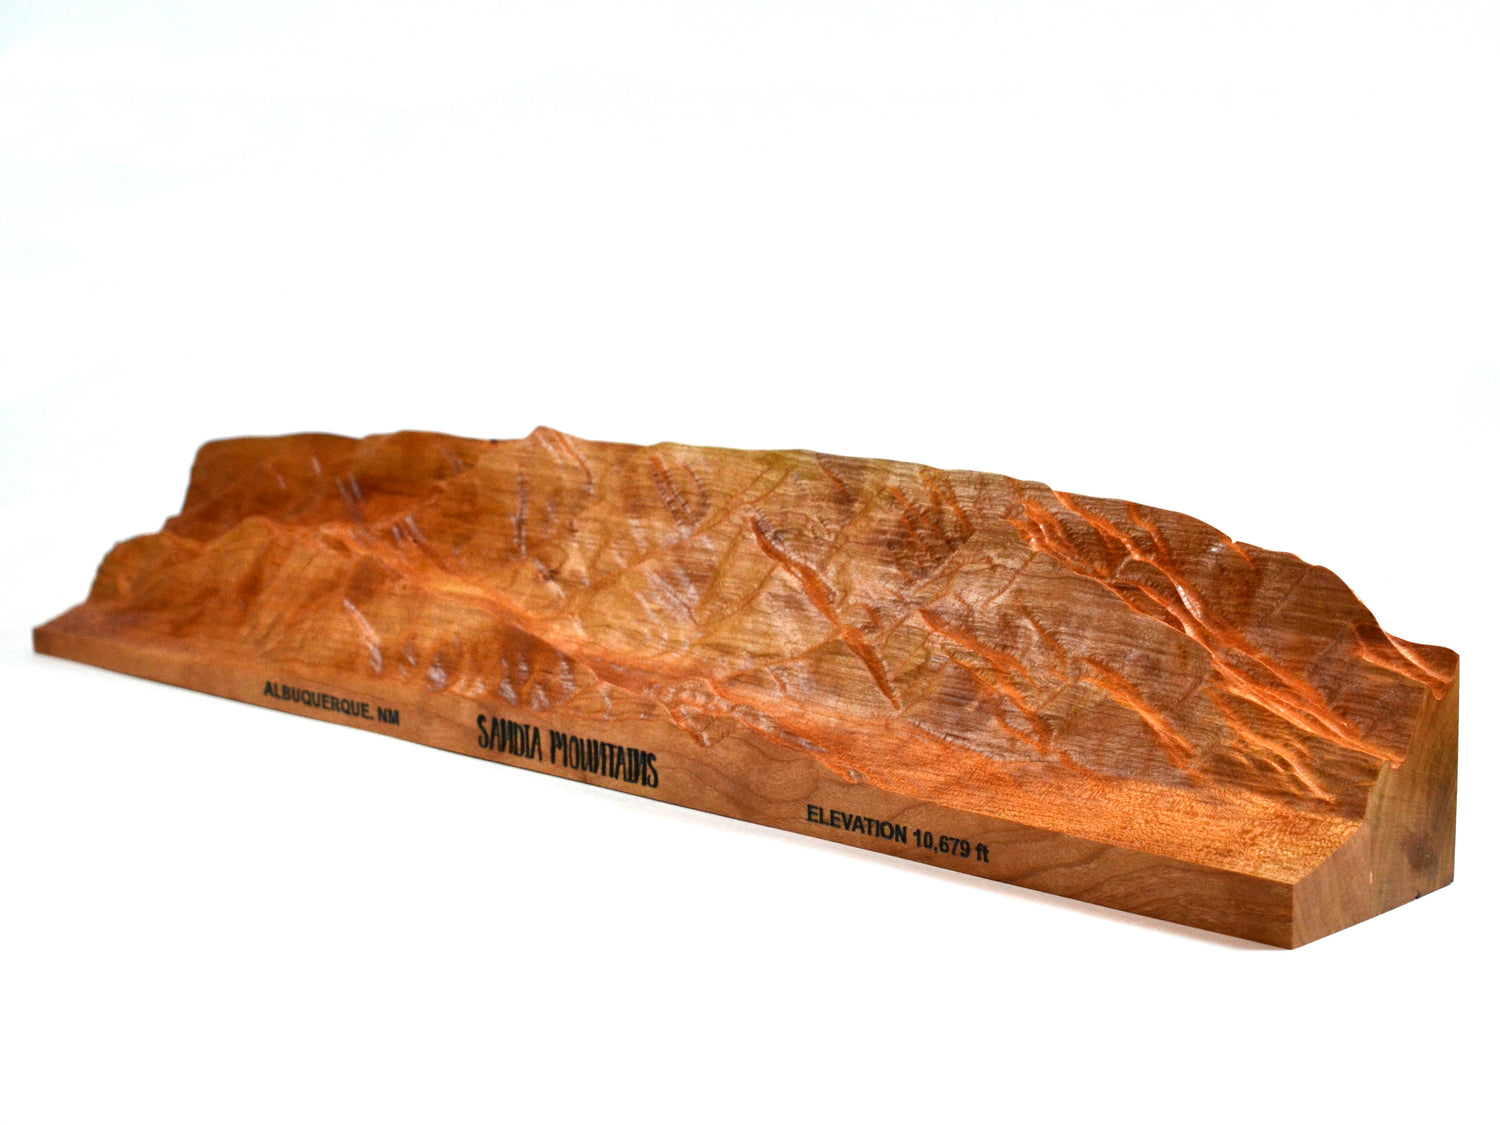 red cherry wood sandia mountains topographical carving